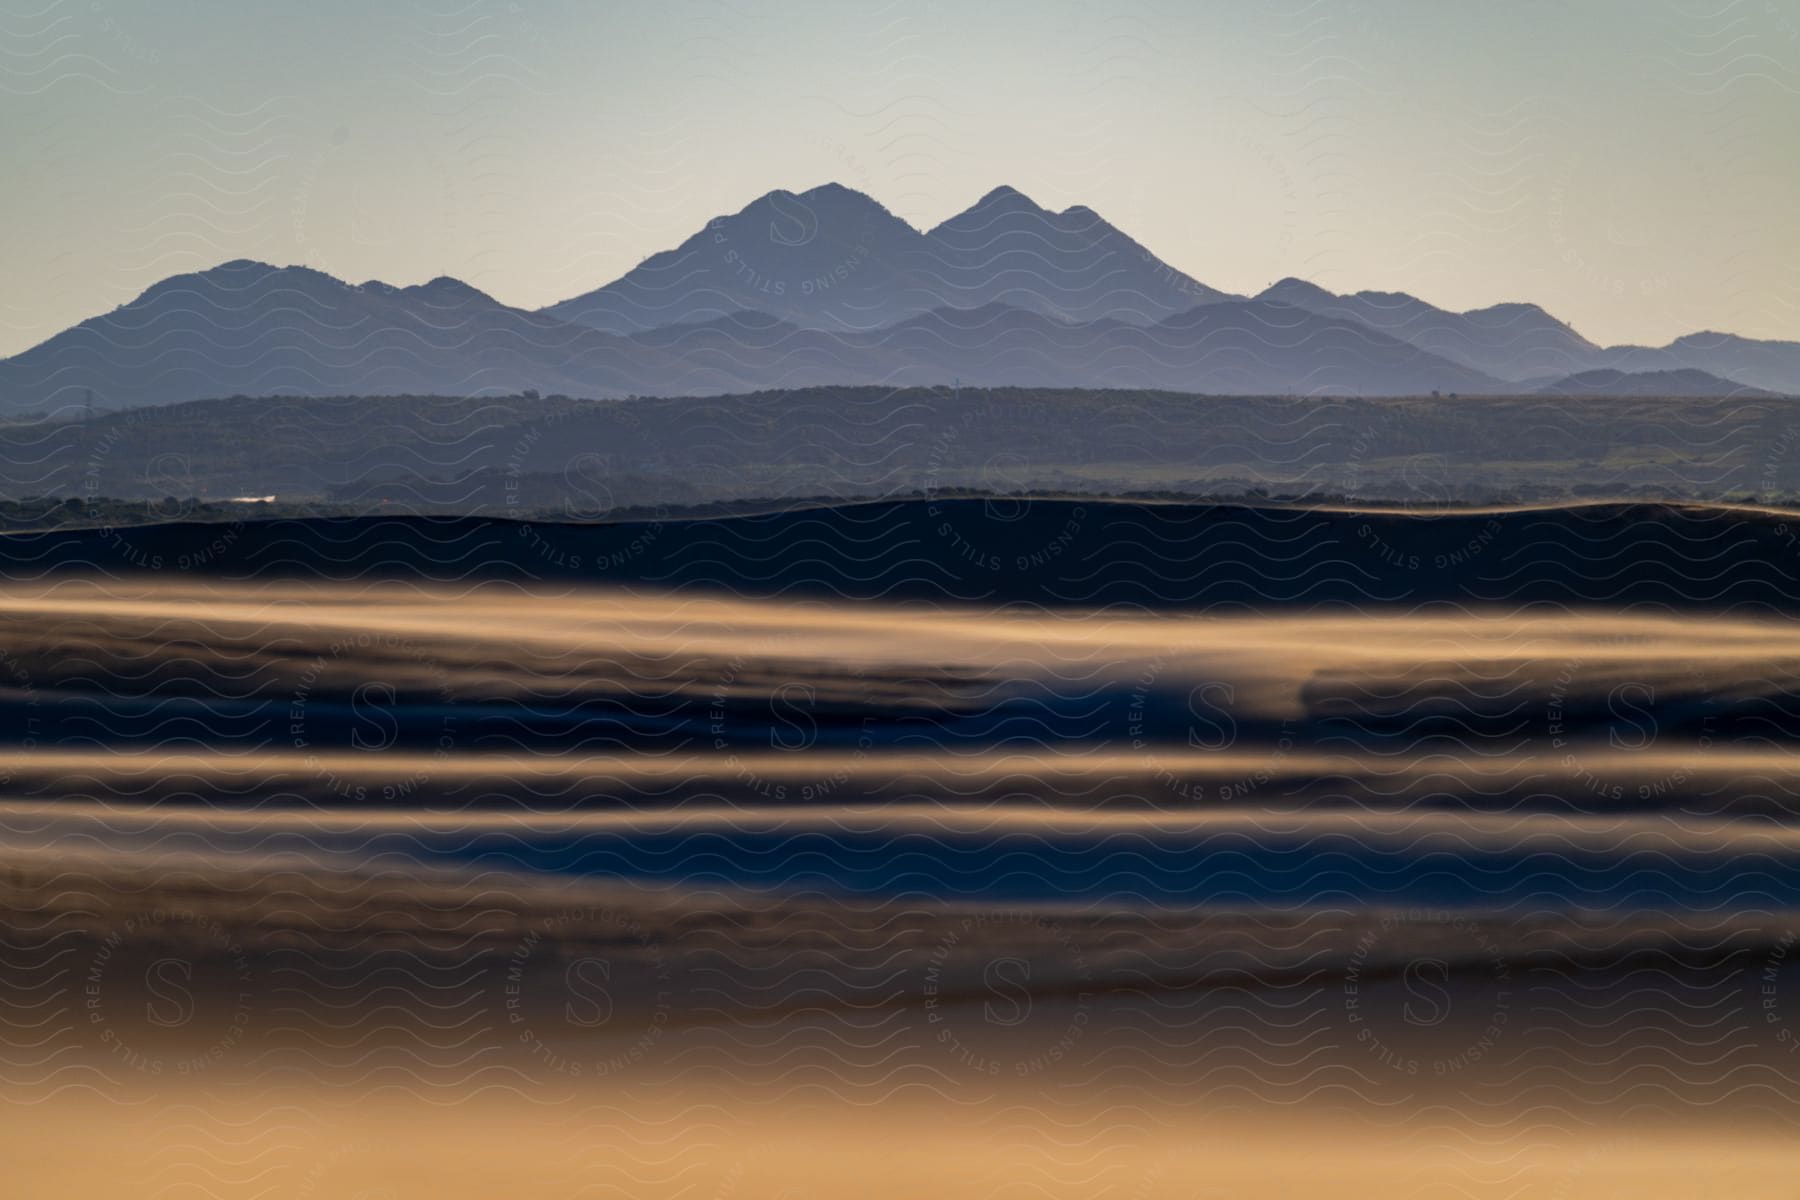 Sand dunes with mountains in the distance